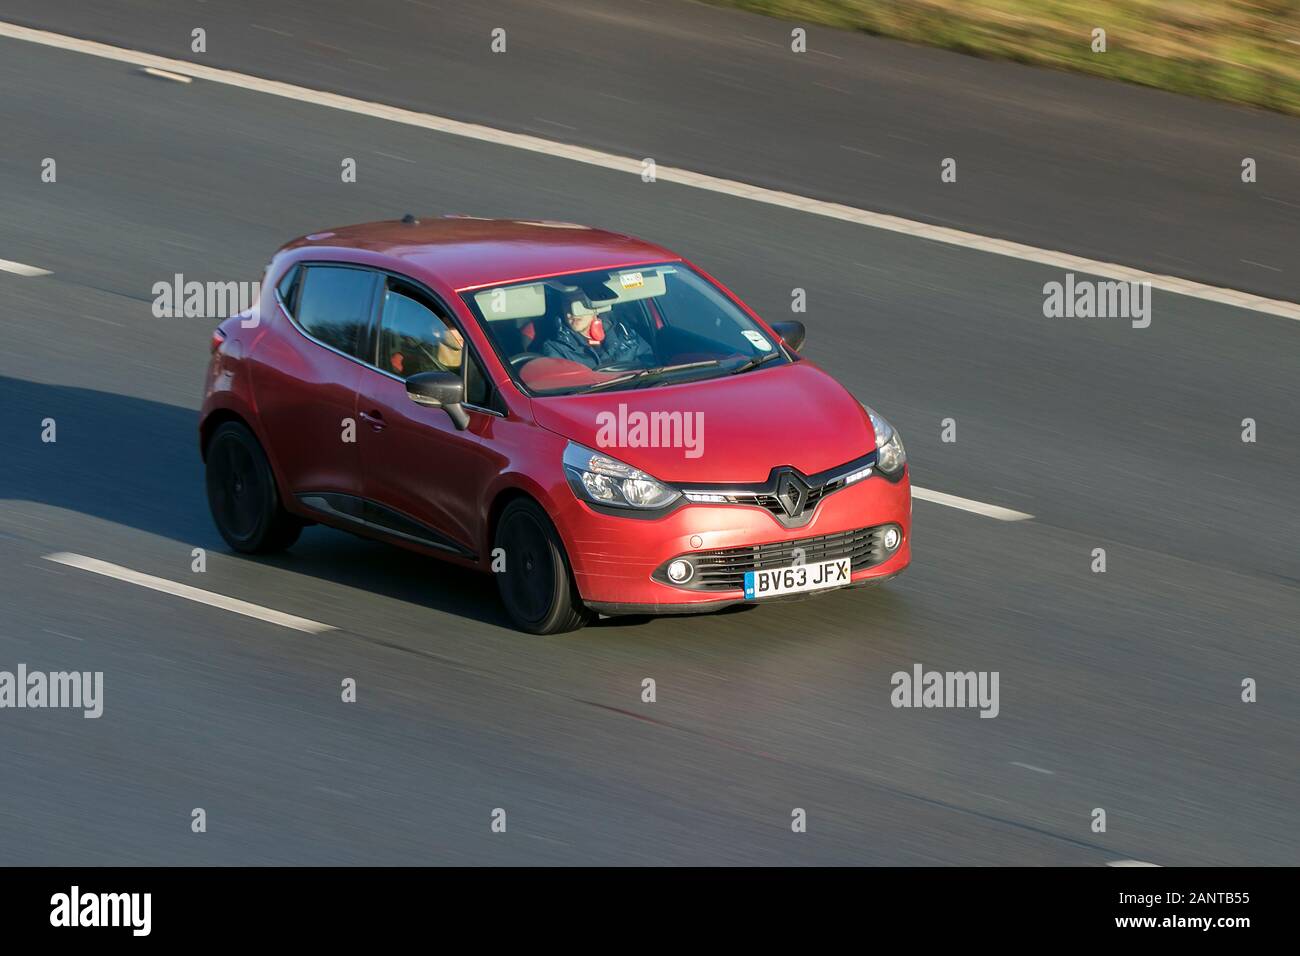 Renault Clio D-Que S M-Nav Nrg Dci S/S Diesel red car driving on the M6 motorway near Preston in Lancashire, UK Stock Photo